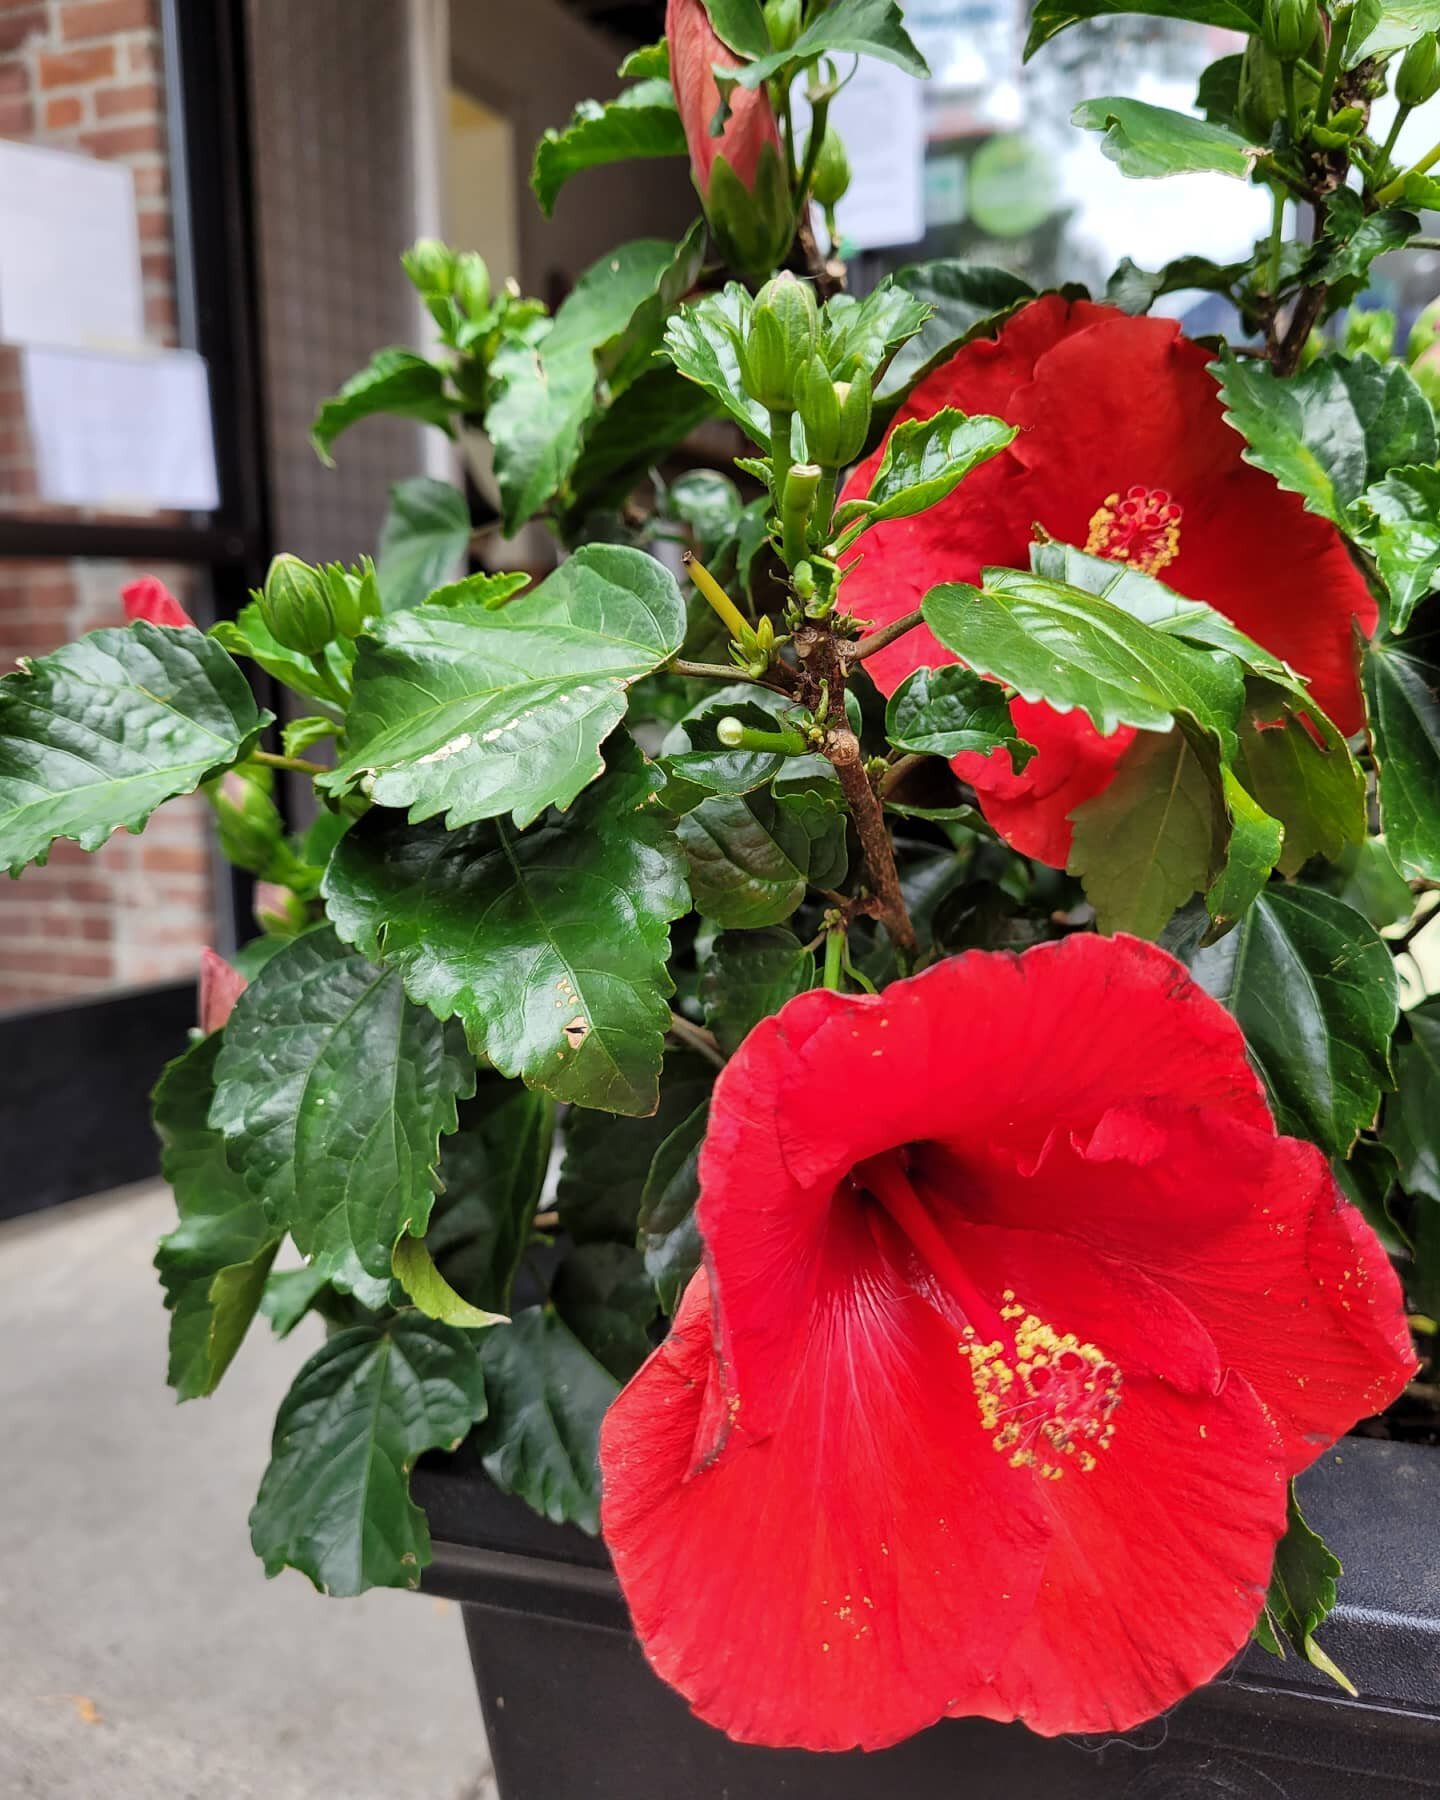 🌺 Kokiʻo ʻula 🌺

If you've been by Ula lately you'll notice our gorgeous red hibiscus flowers in full bloom.

There's a red hibiscus species that's native to Hawai'i is called kokiʻo ʻula. &quot;Kokiʻo&quot; means hibiscus and &quot;ula&quot; means